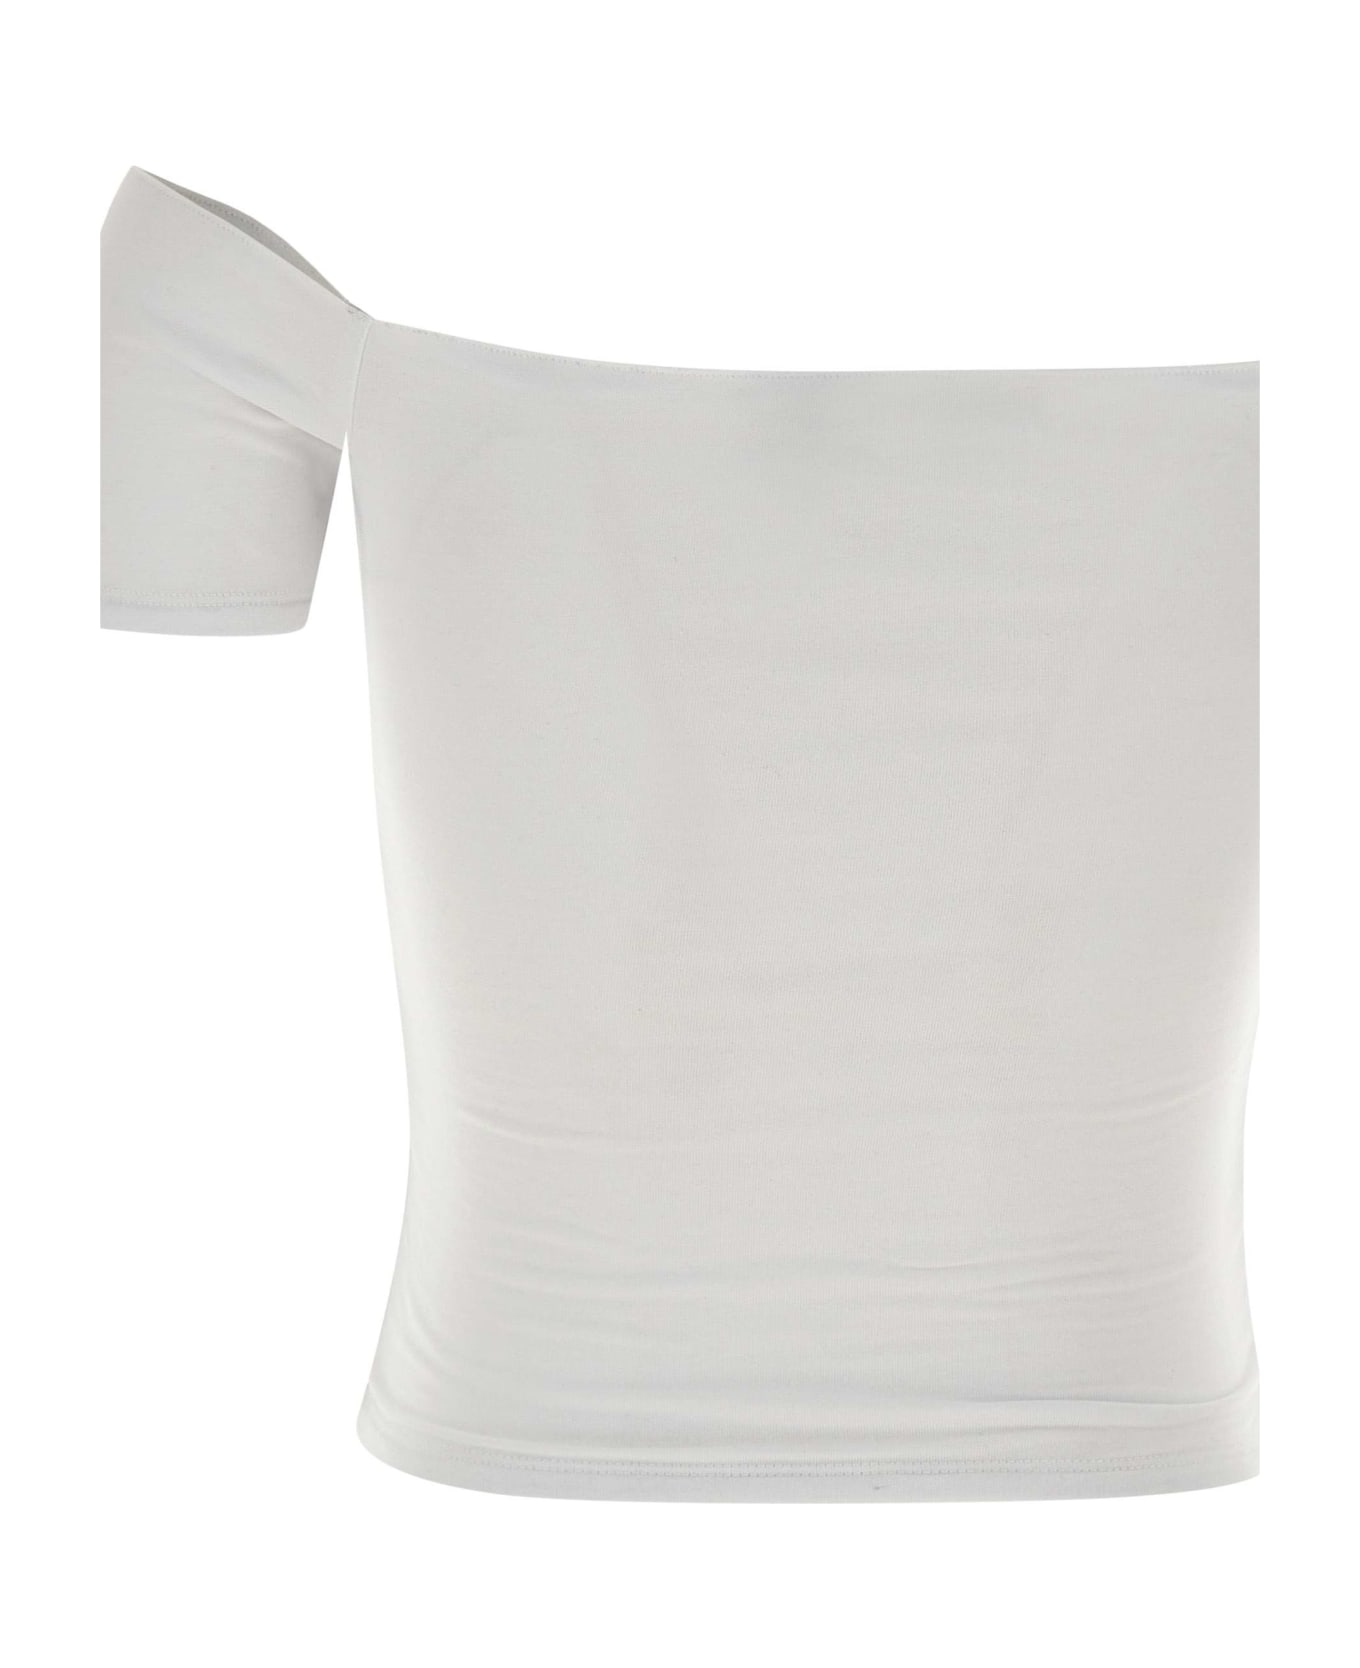 Rotate by Birger Christensen "logo Off" Cotton And Modal Top - WHITE